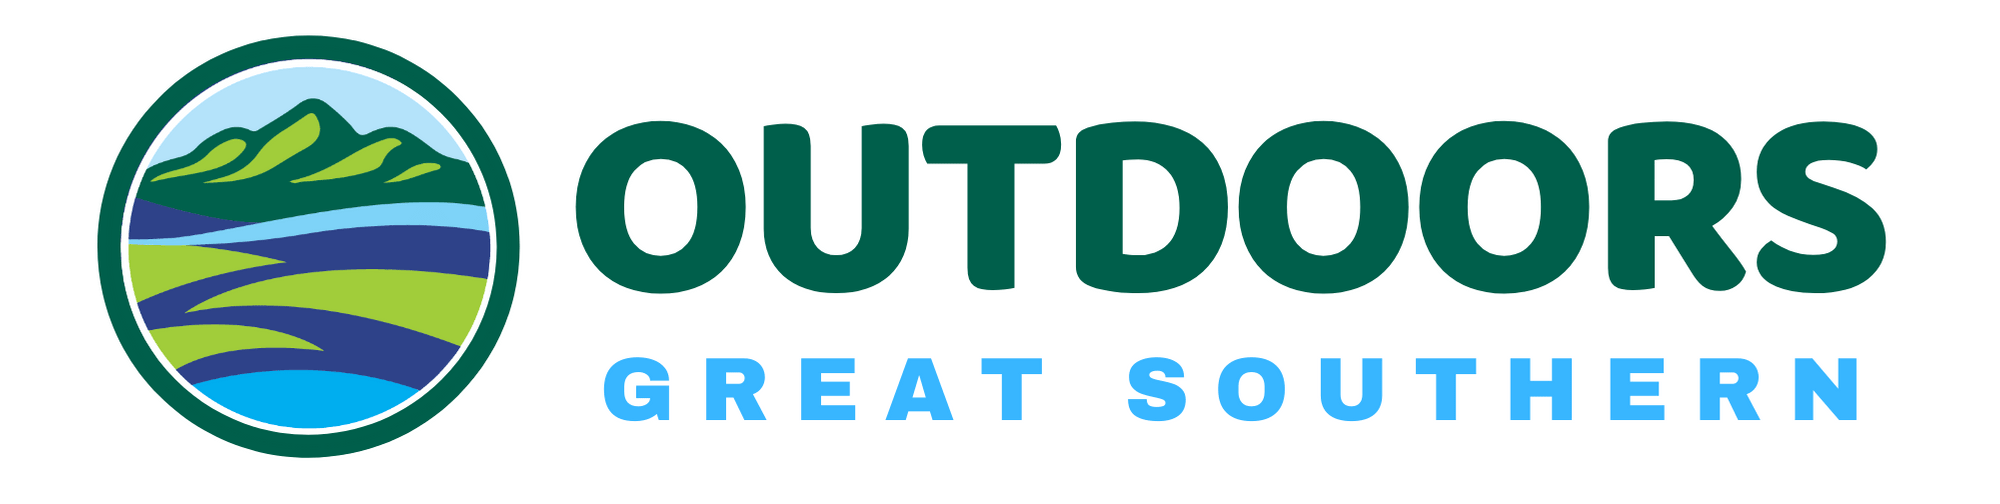 outdoors-great-southern-logo.png